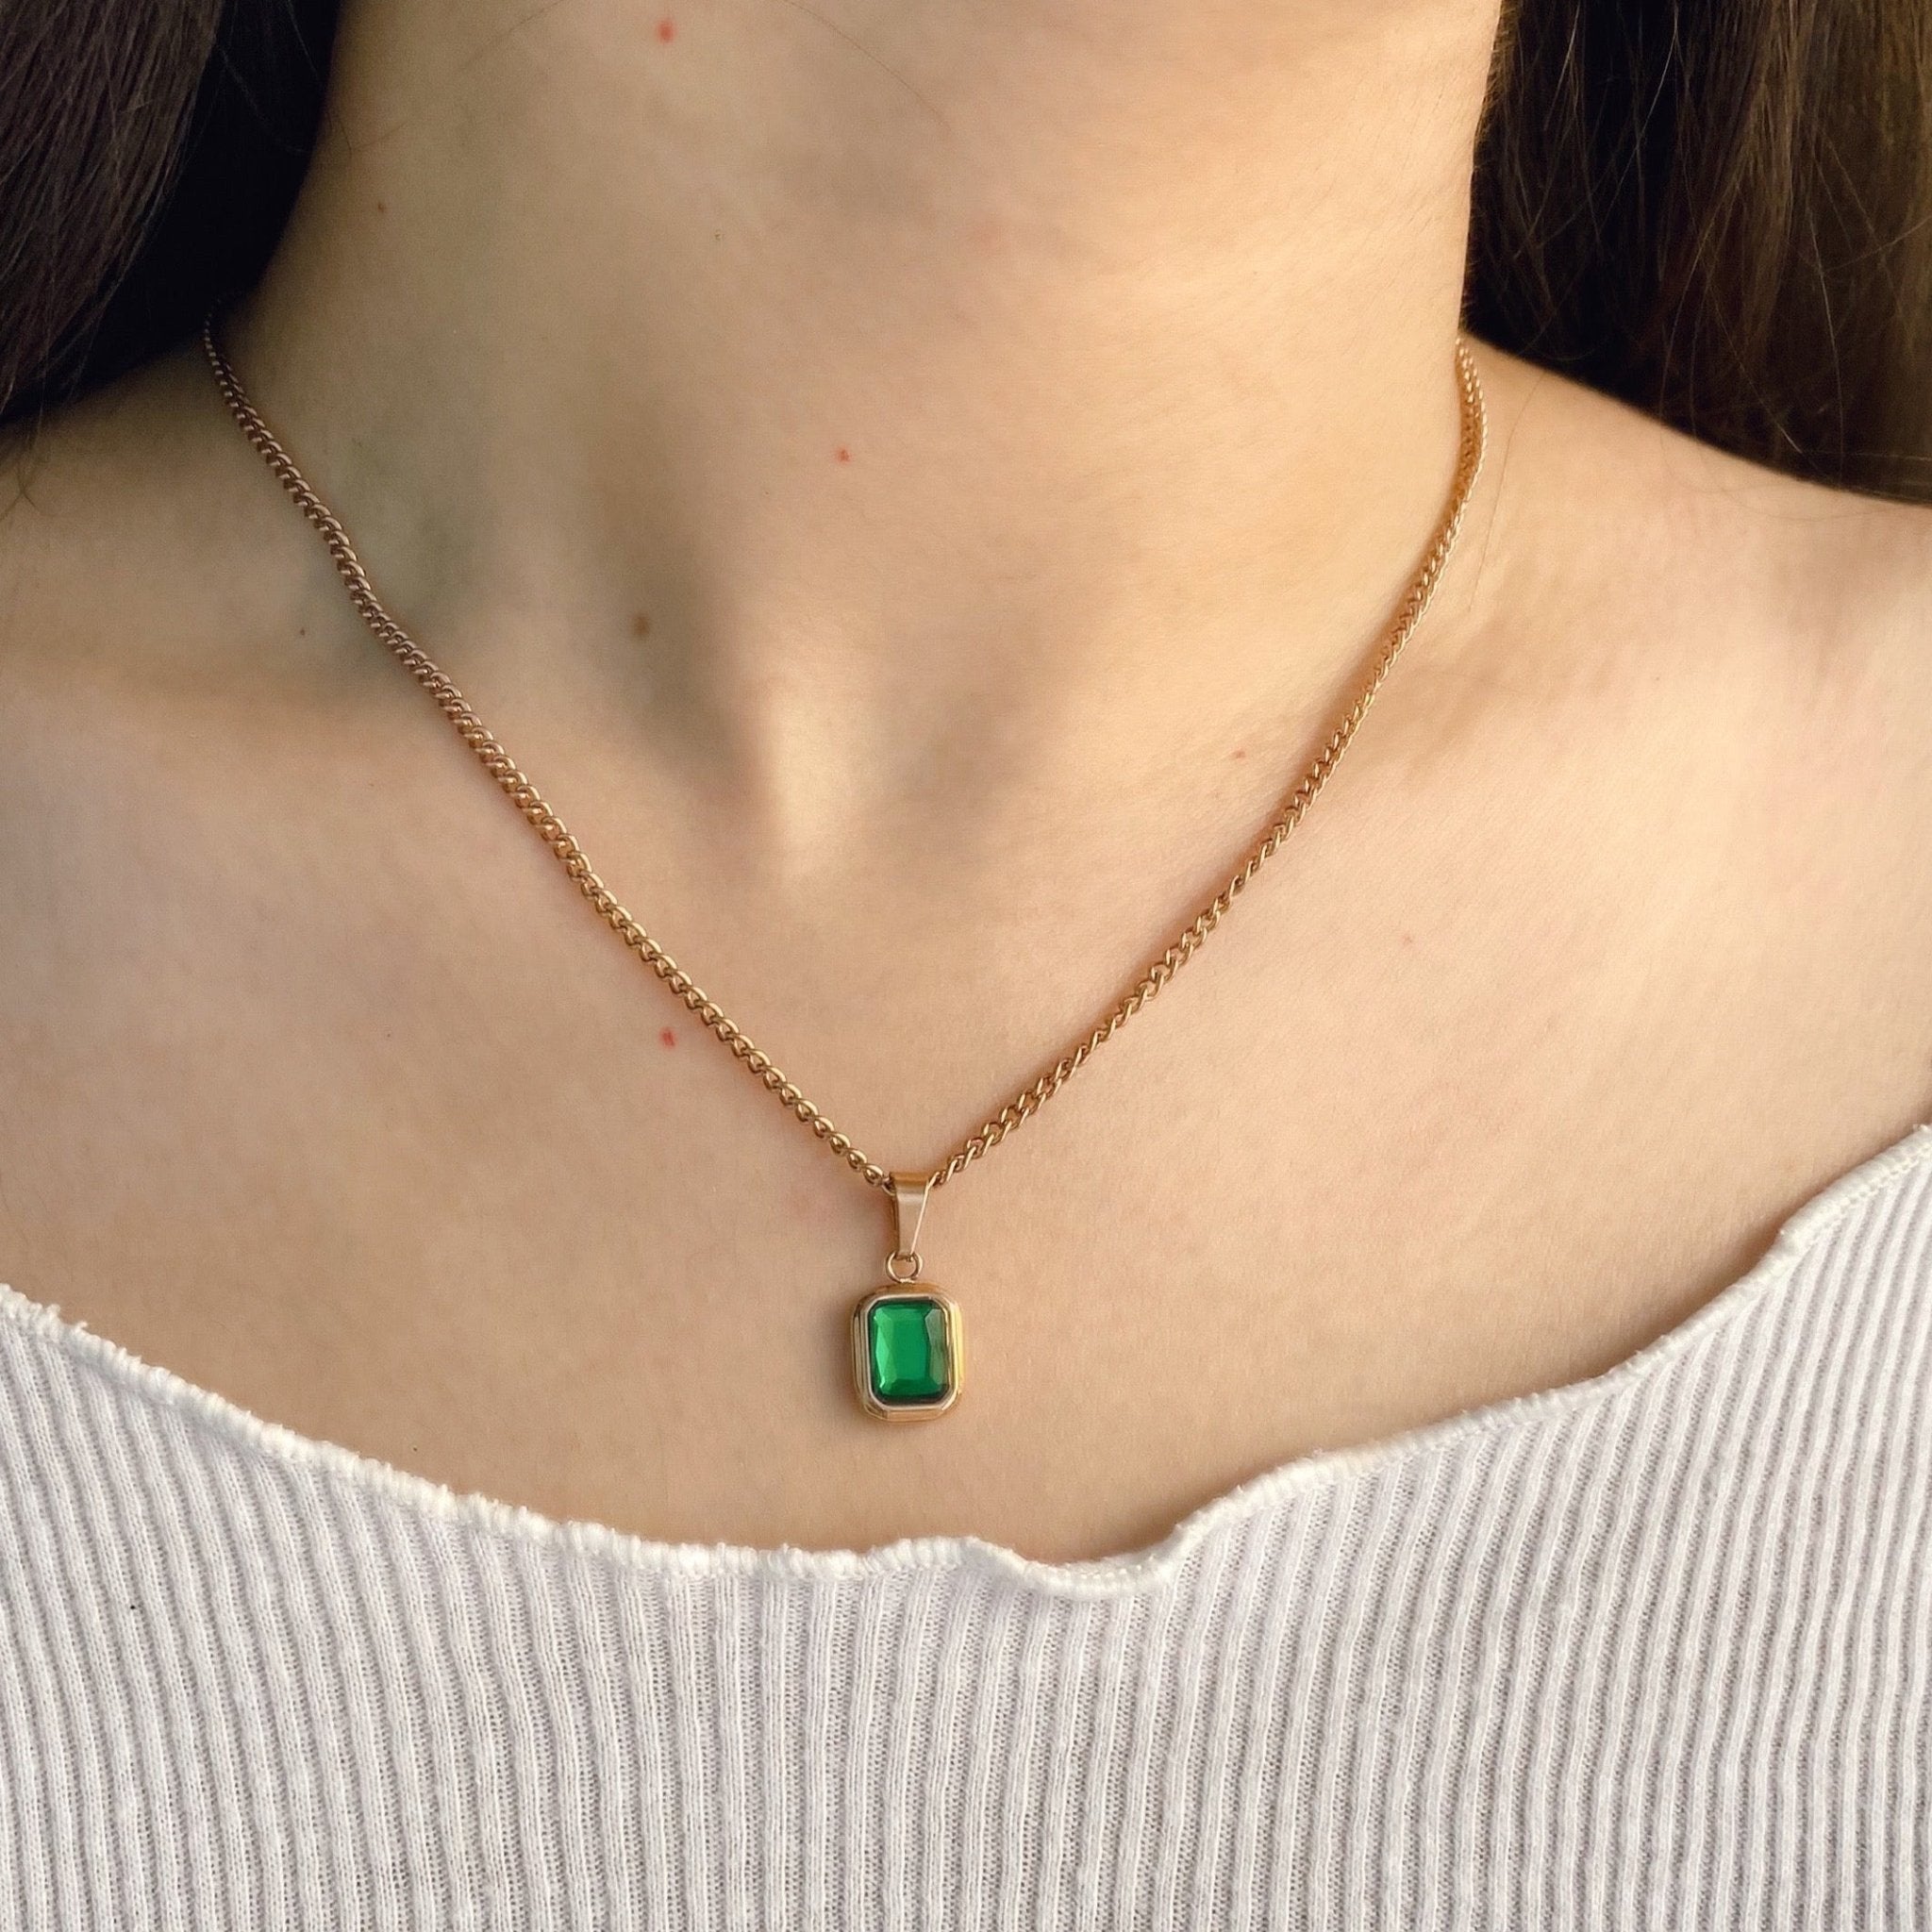 Buy Genuine Jade Necklace in Sterling Silver, Silver Jade Necklace, 35th  Wedding Anniversary Gift, Green Jade, Extra Large Online in India - Etsy